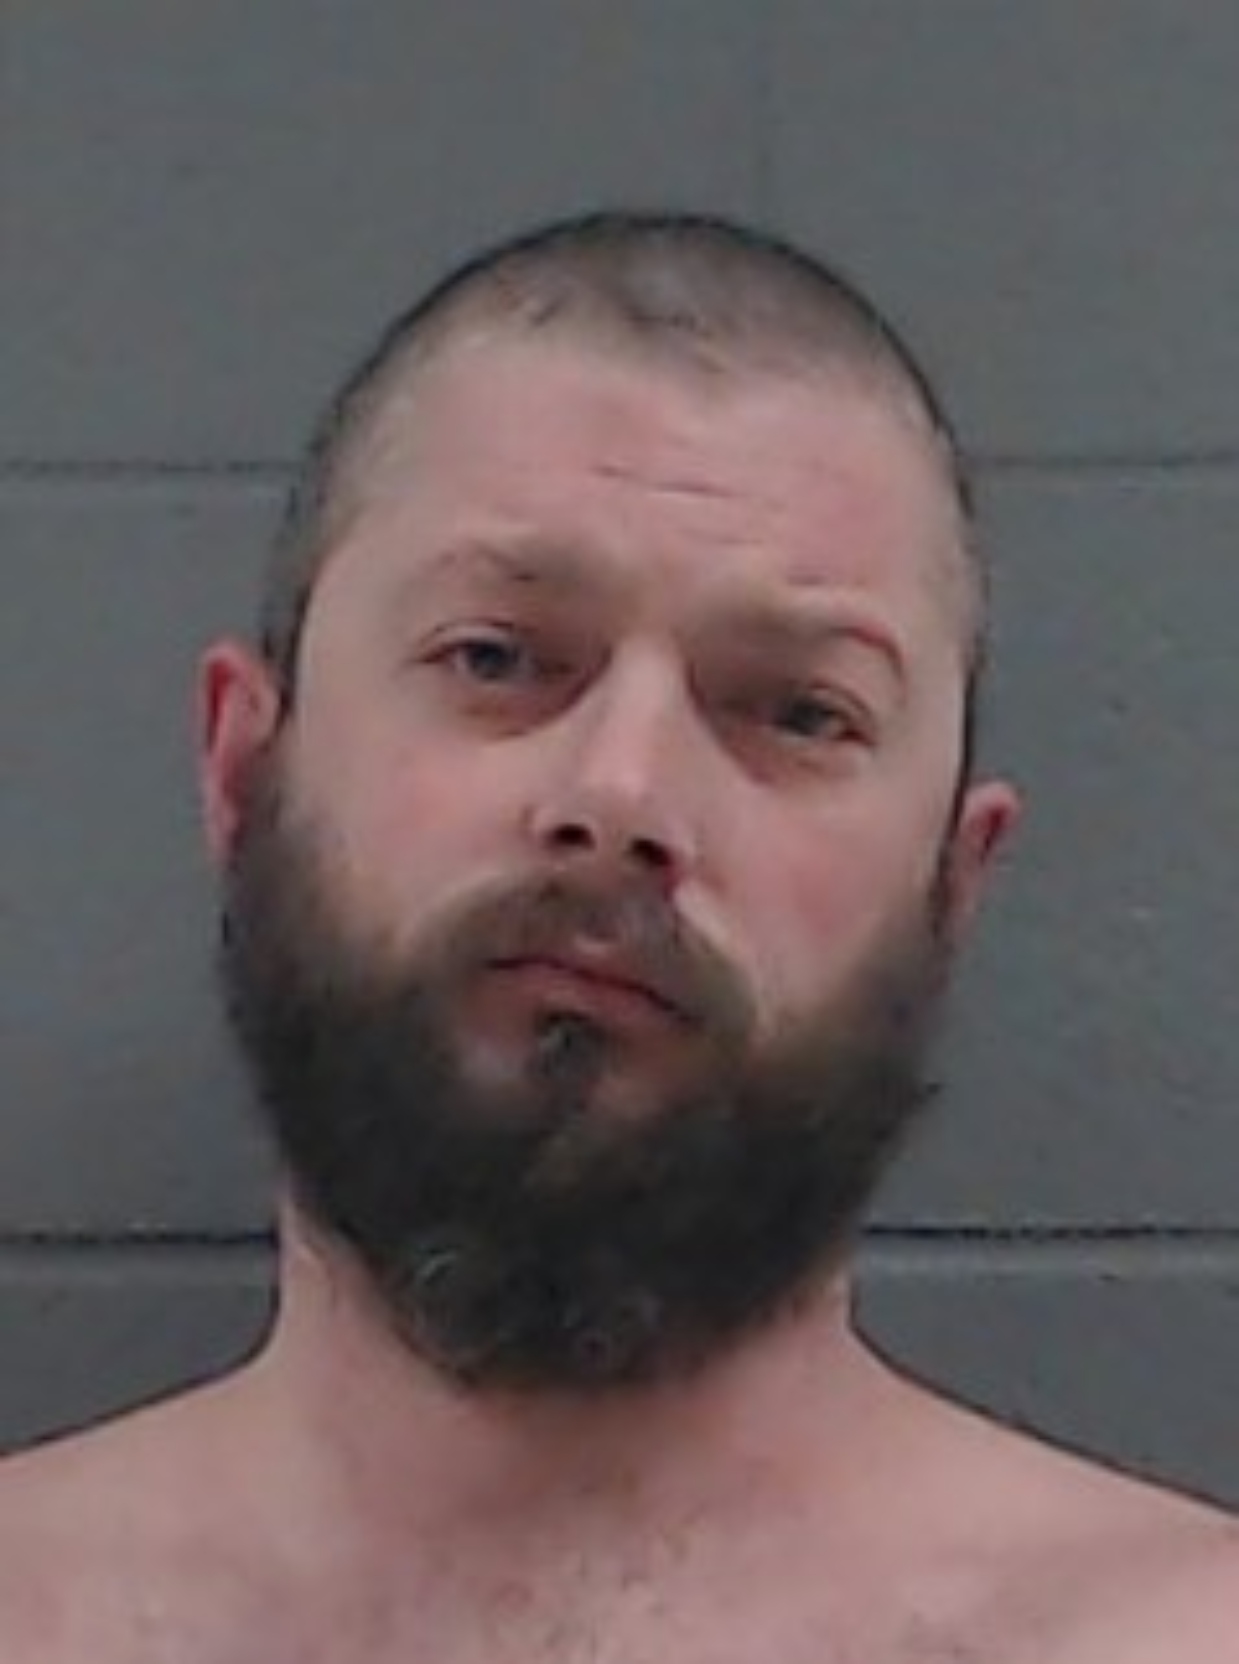 Brandon M. Smith, 39, of Woodstock was taken into custody on March 29 after threatening to harm public officials